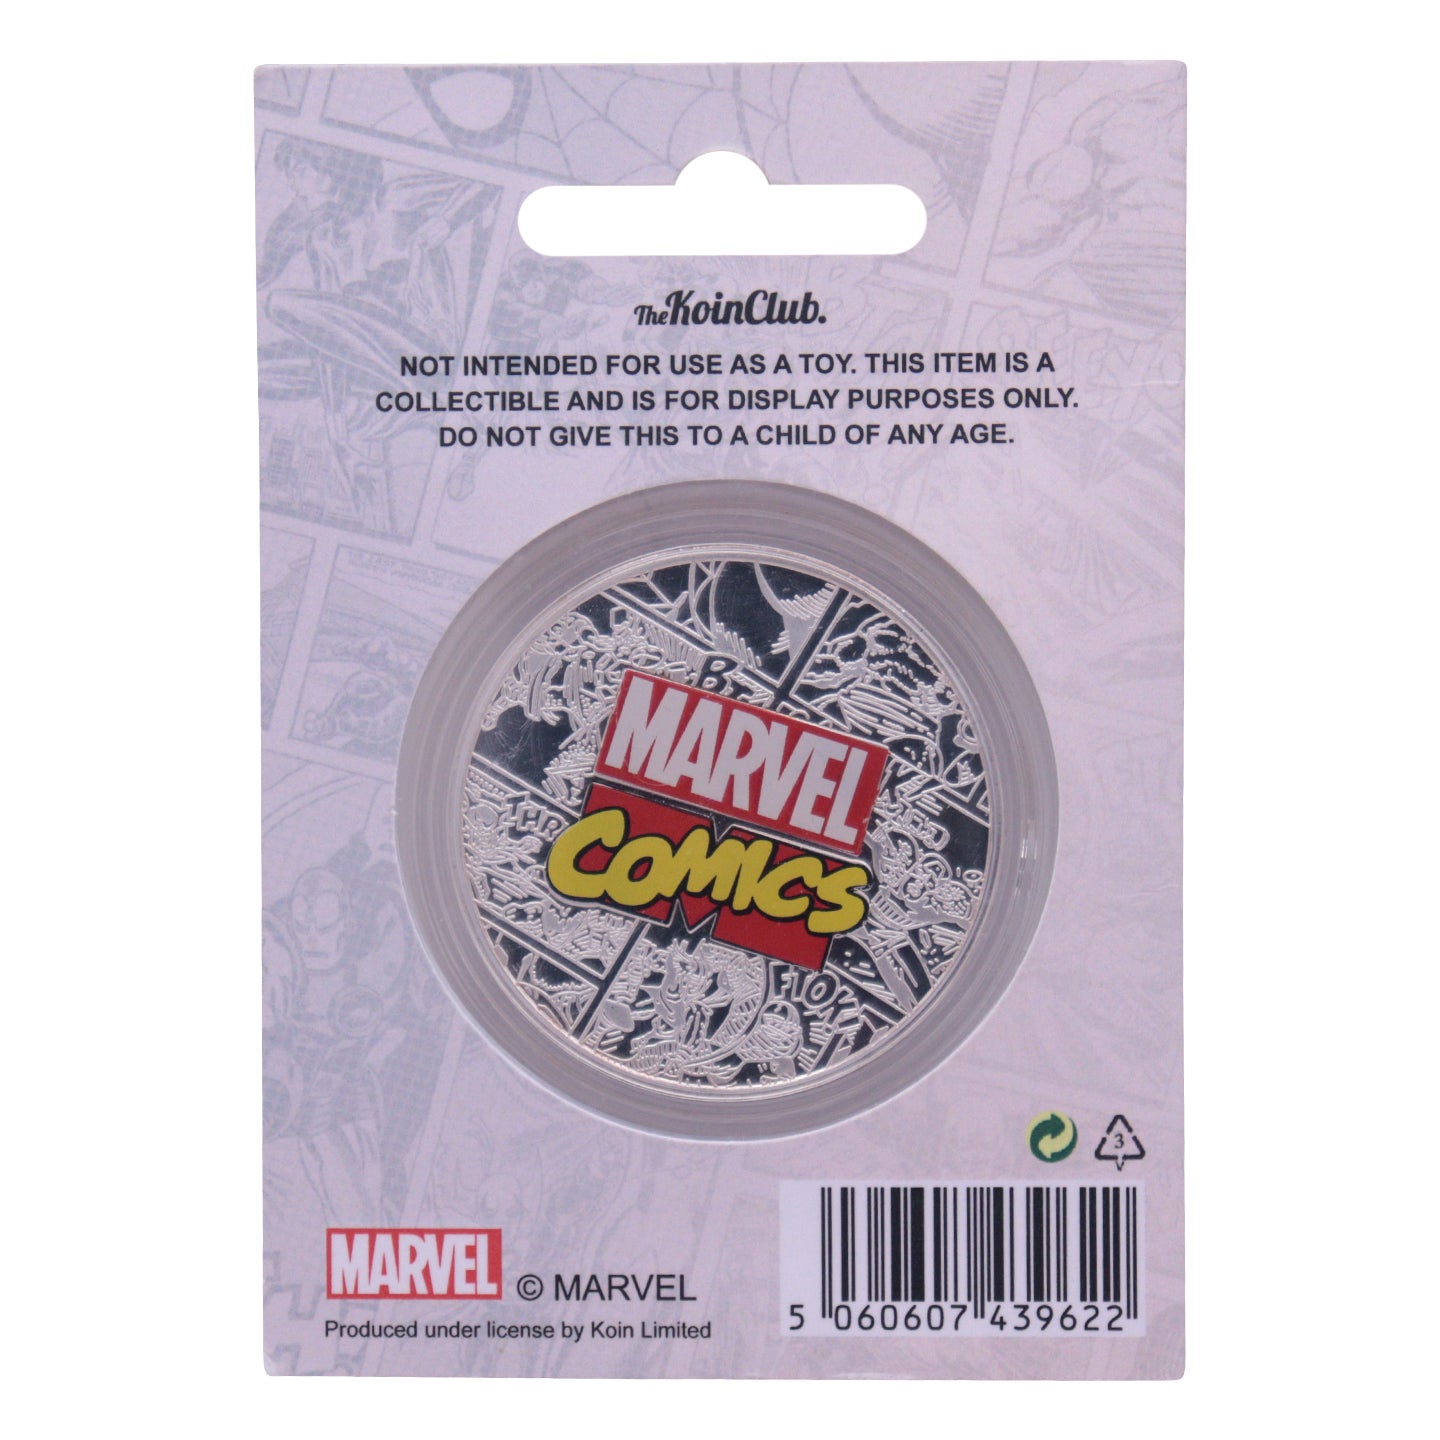 Marvel Limited Edition .999 Silver Plated Thor Collectible Coin